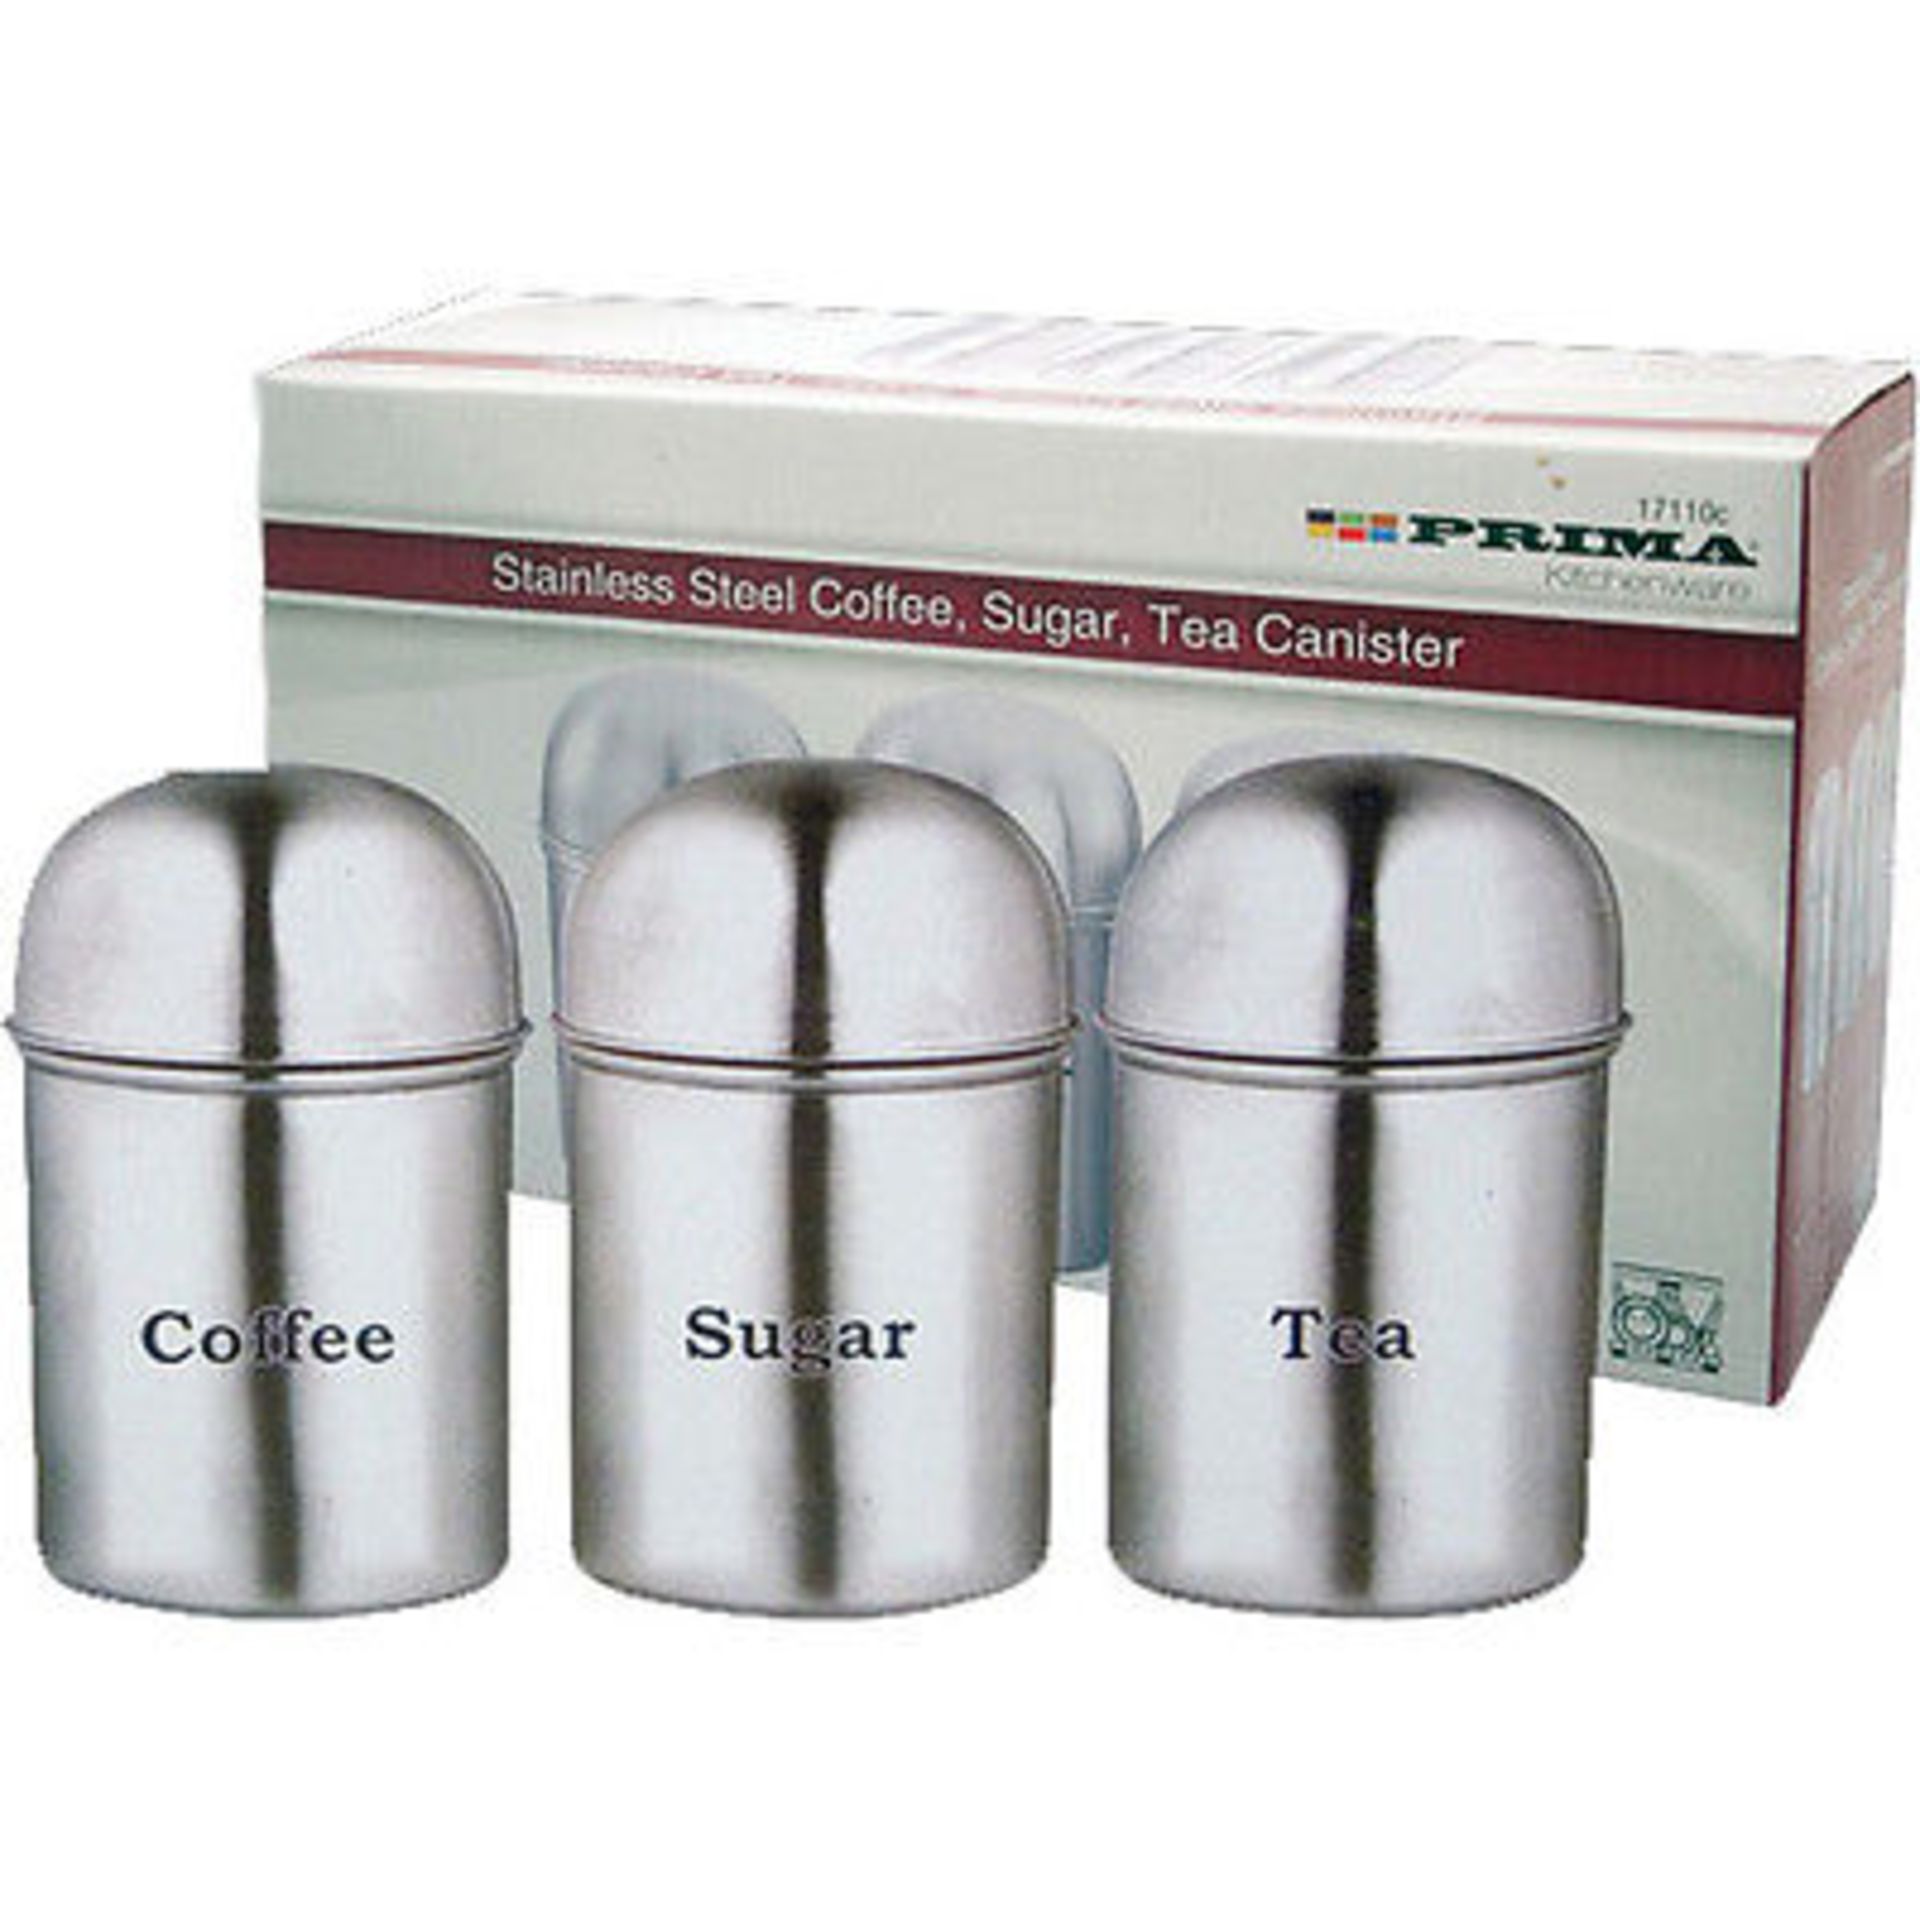 V *TRADE QTY* Brand New 3 Piece Stainless Steel Coffee Sugar and Tea Kitchen Jars X 5 YOUR BID PRICE